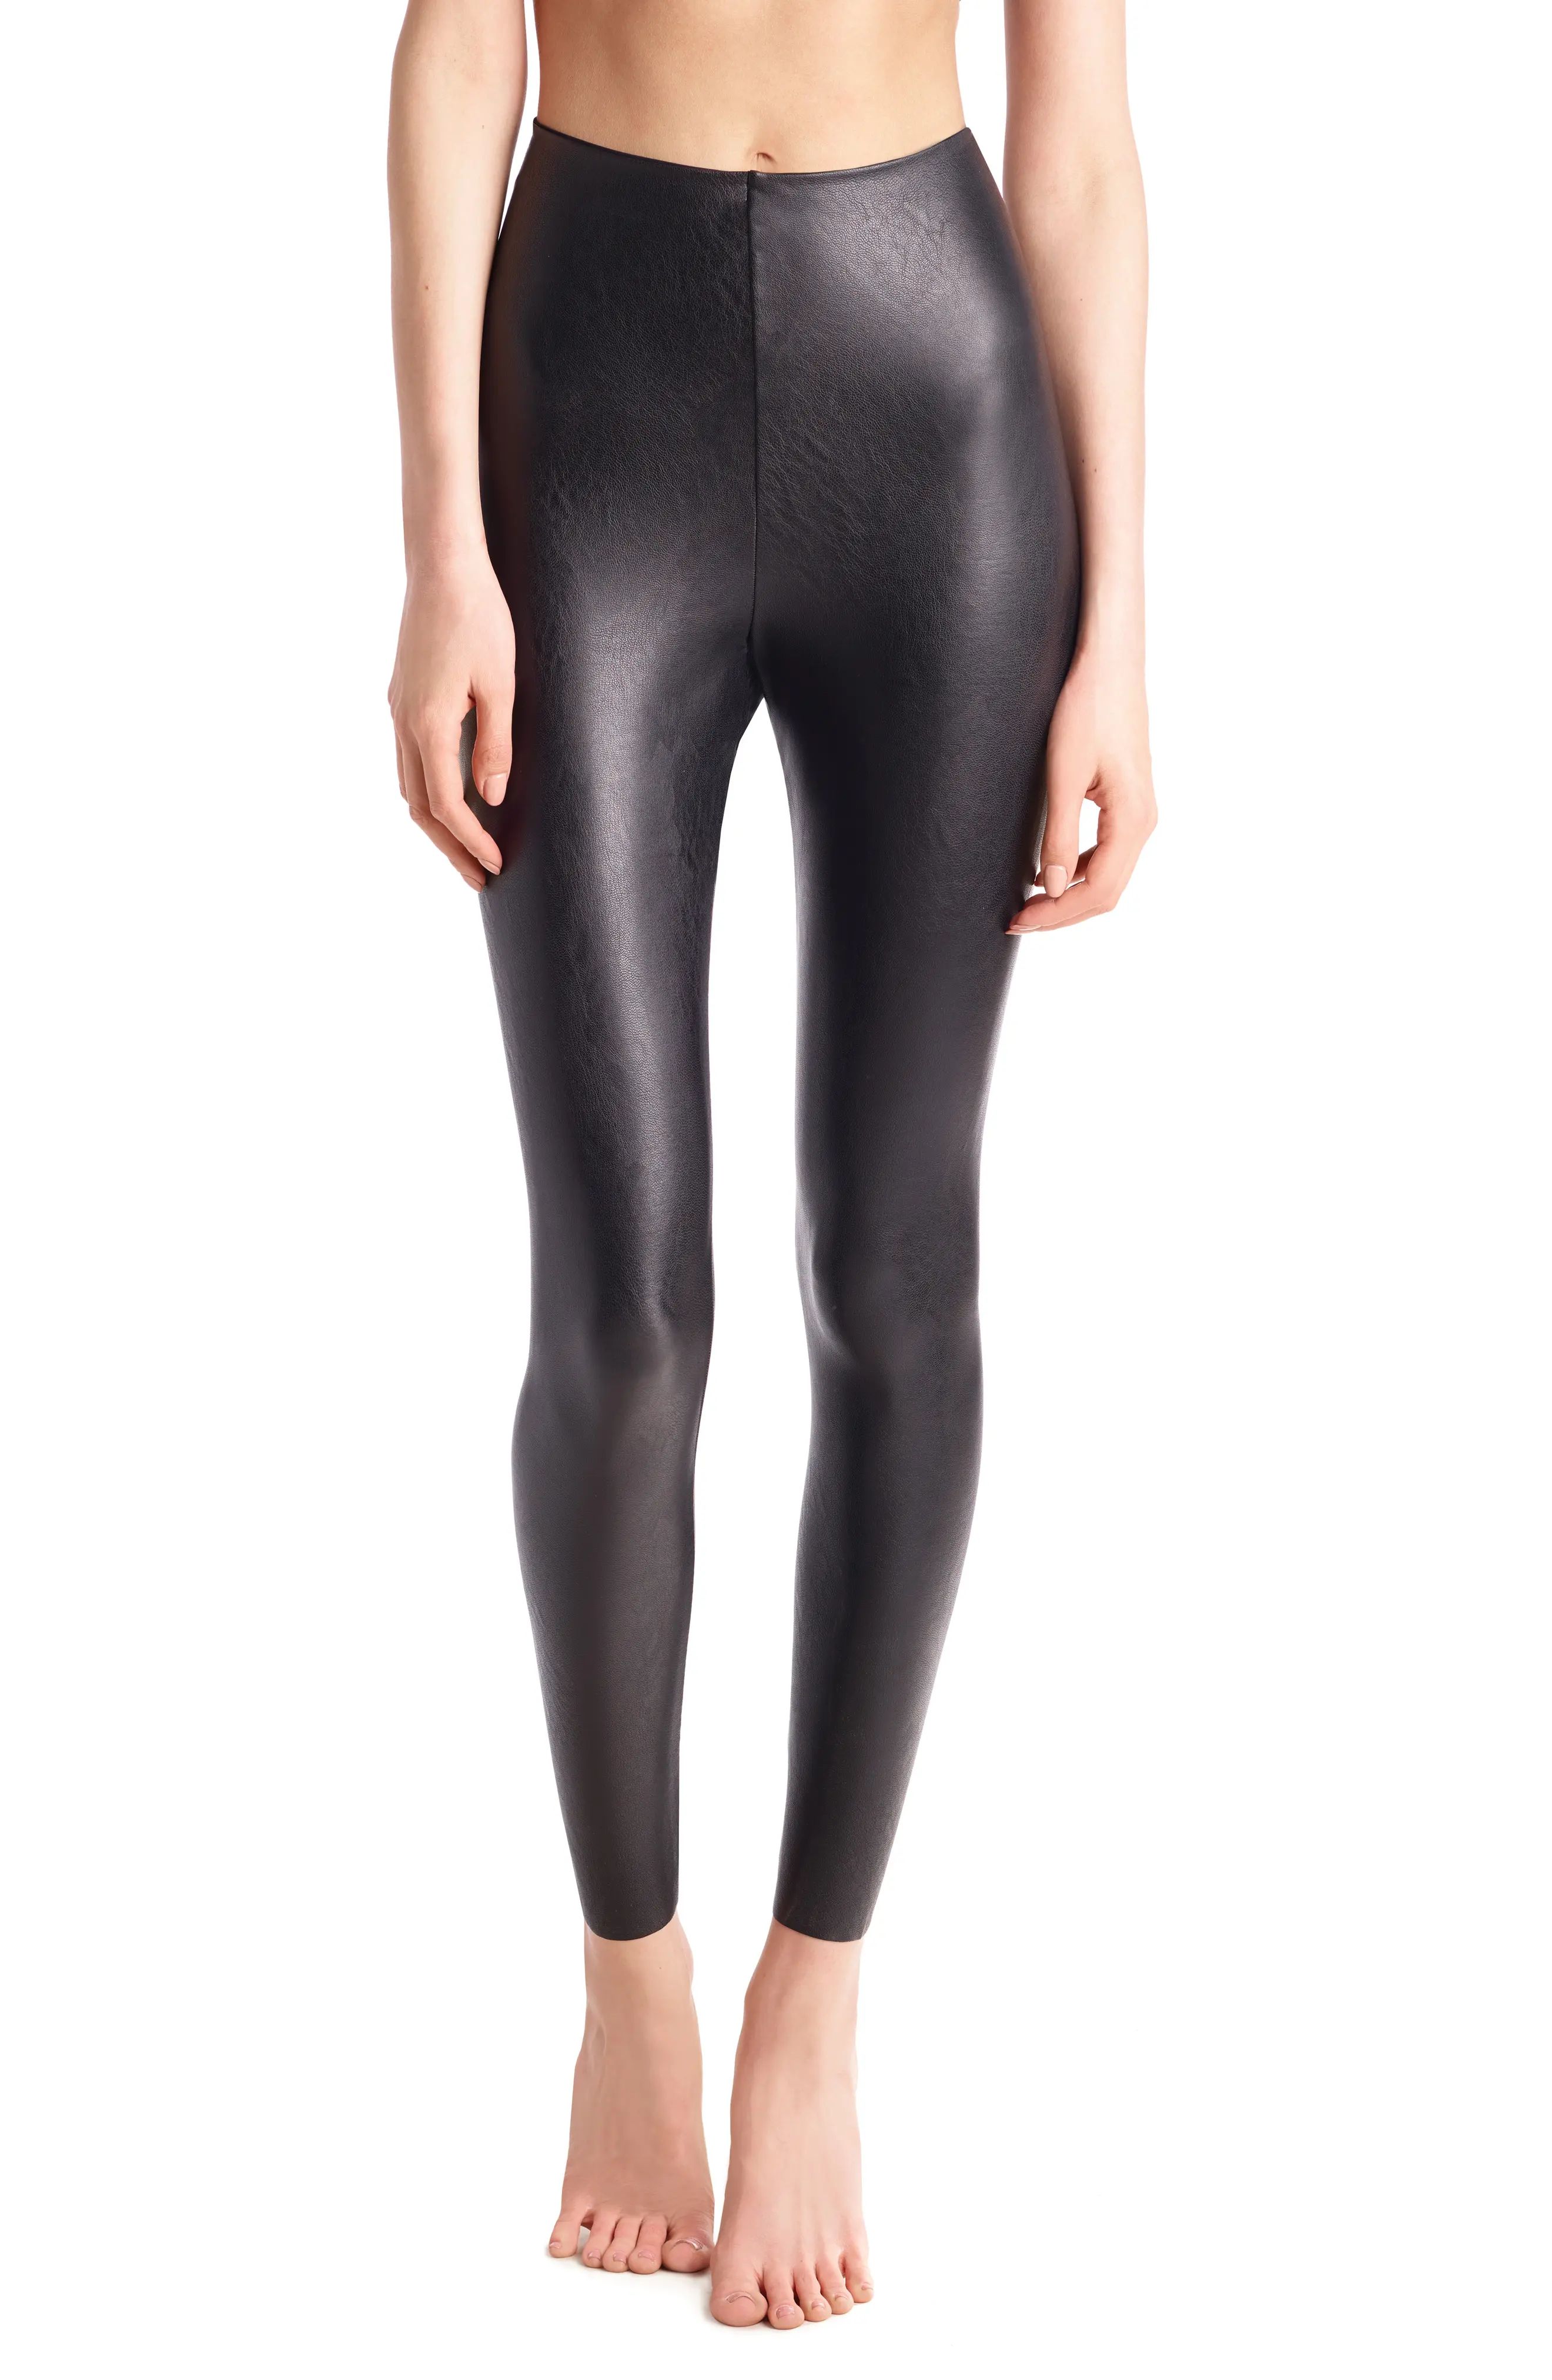 Commando Faux Leather Leggings, Size Large P in Black at Nordstrom | Nordstrom